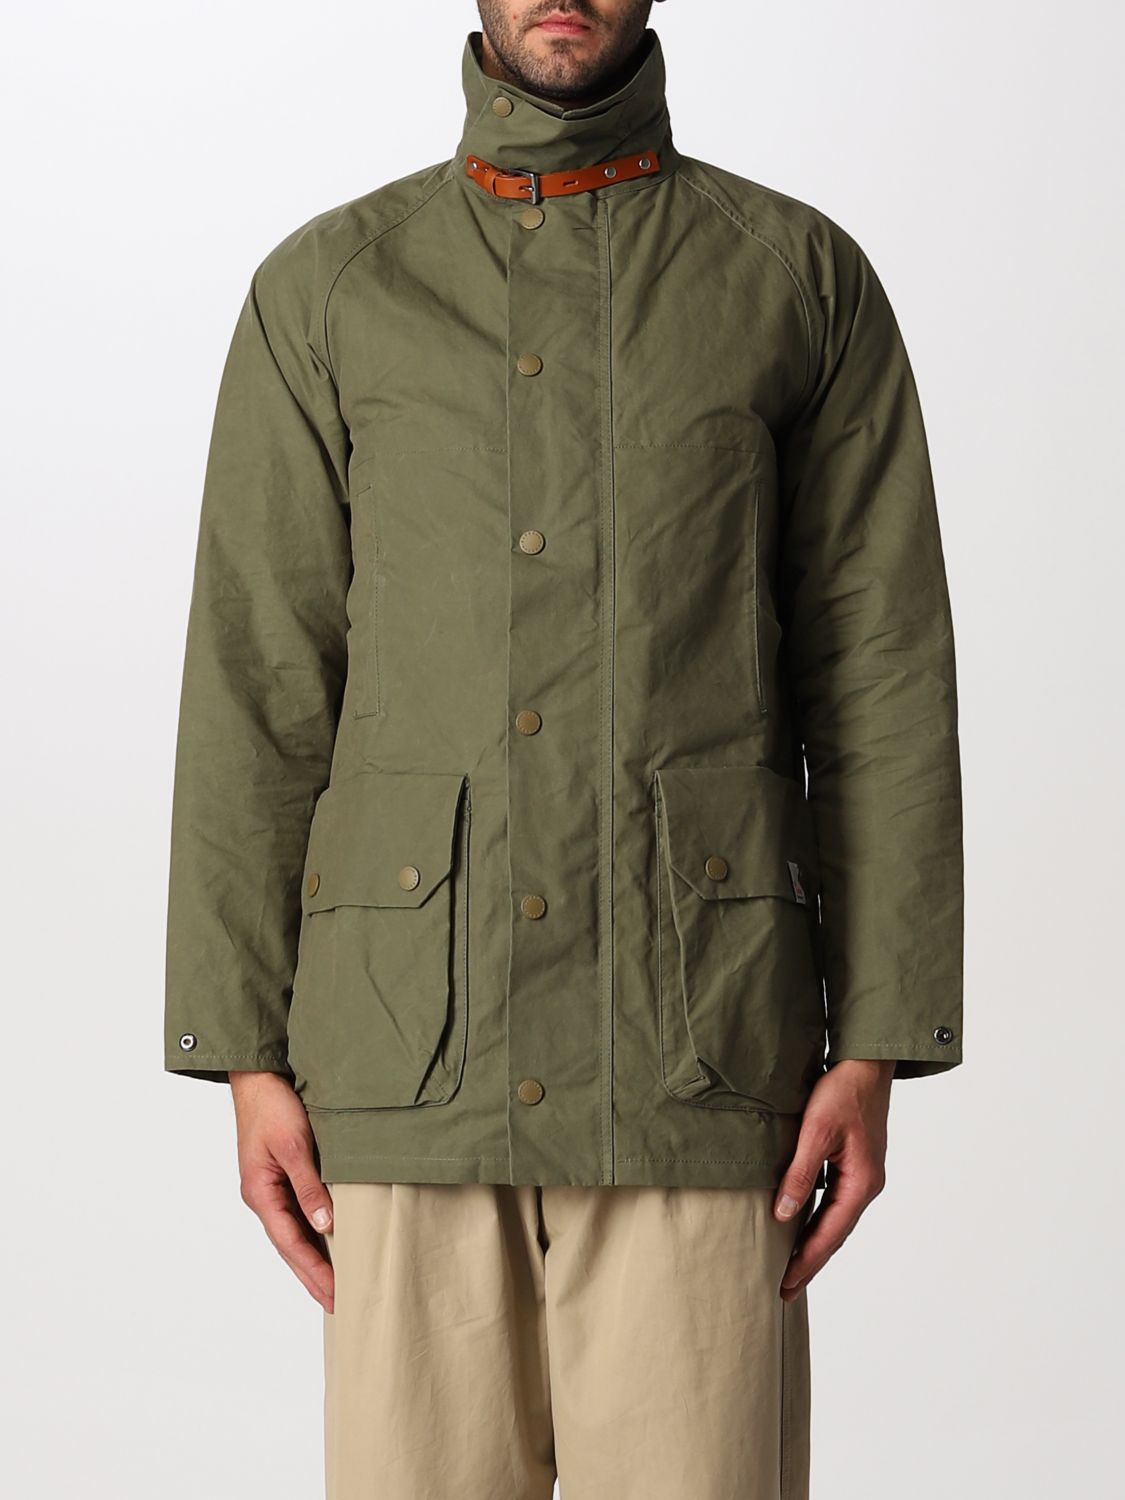 BARBOUR ALLY CAPELLINO: jacket for man - Green | Barbour Ally Capellino ...